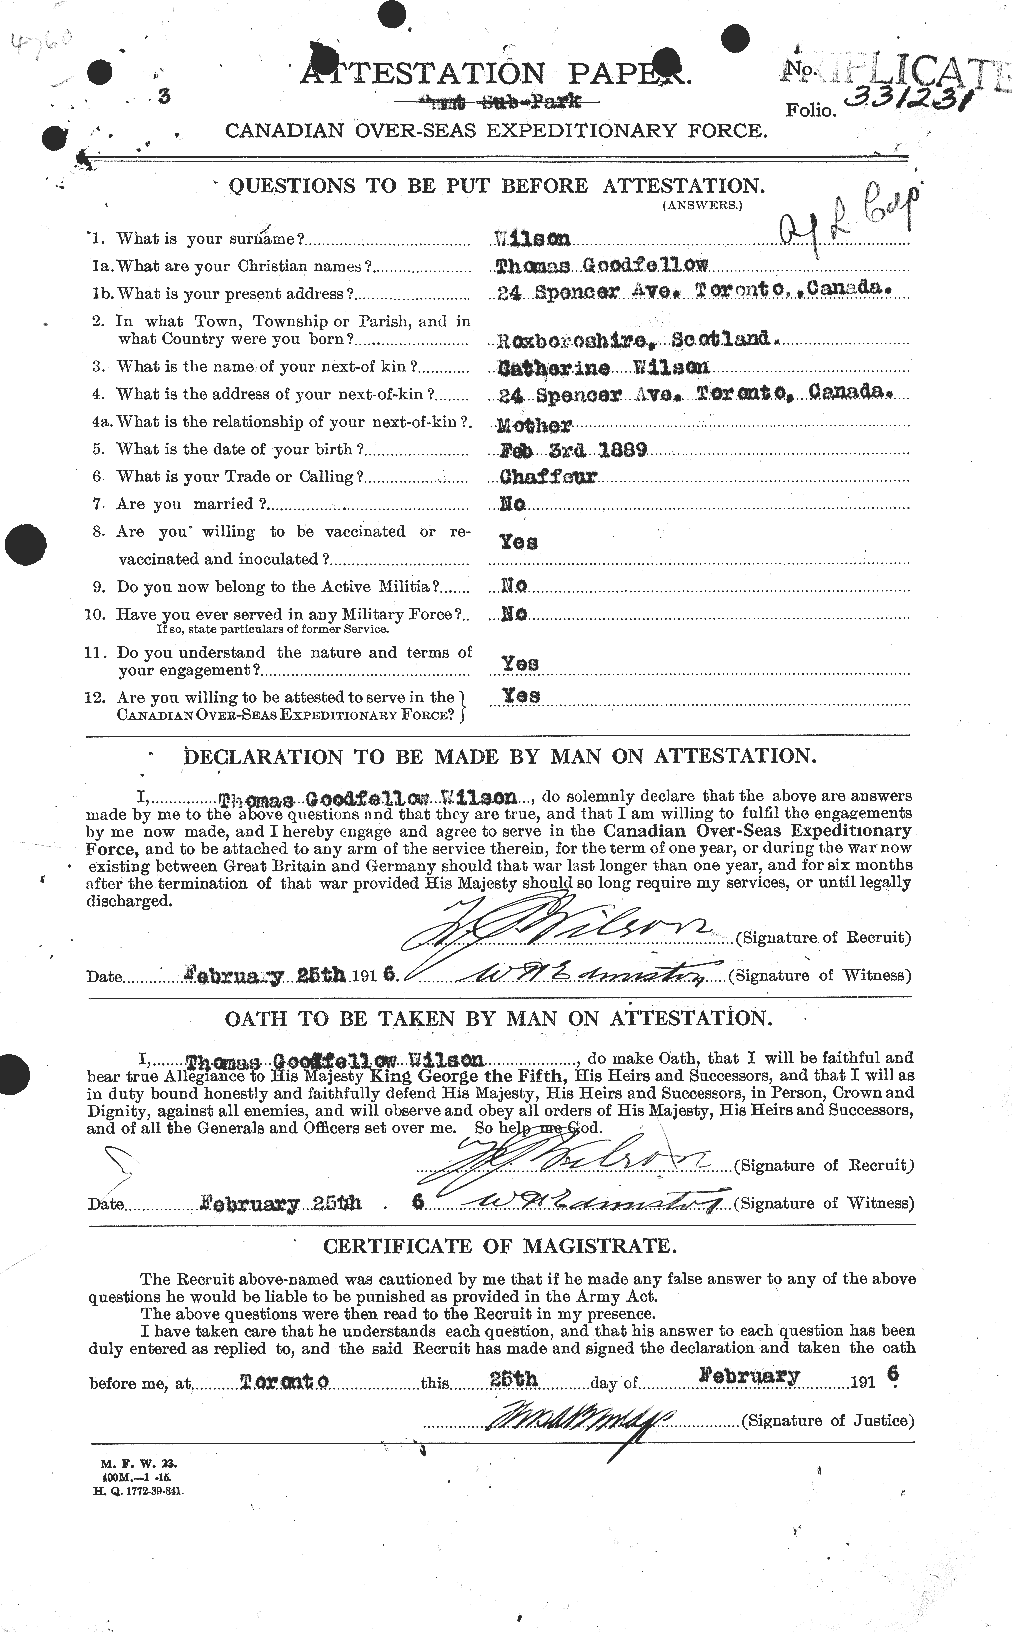 Personnel Records of the First World War - CEF 681260a